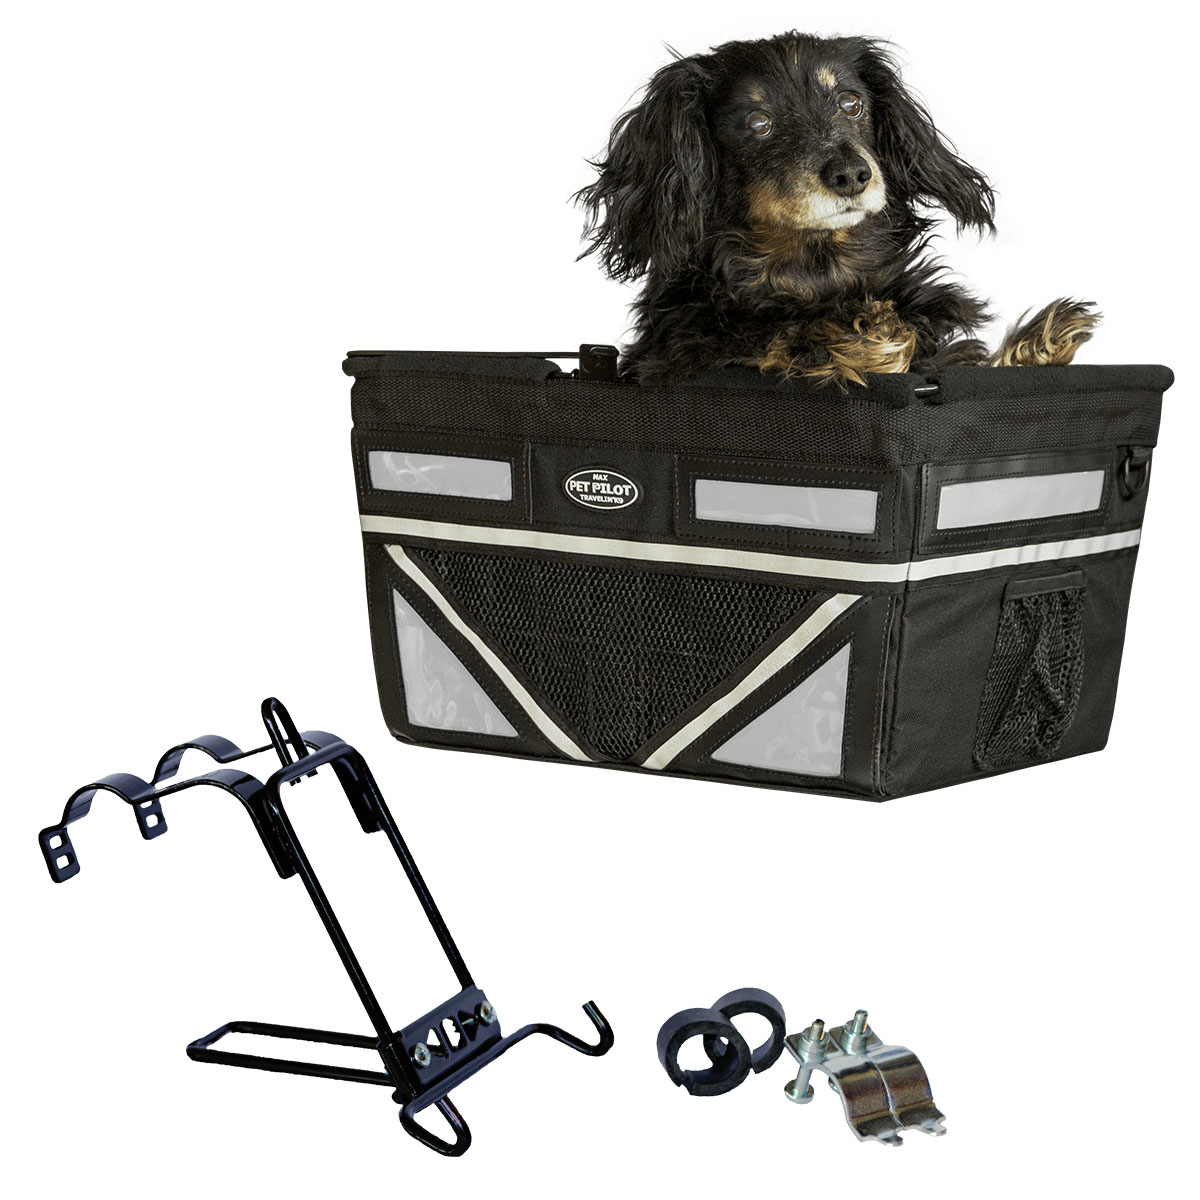 Ptx-8137 Max Dog Bicycle Basket Carrier, Silver